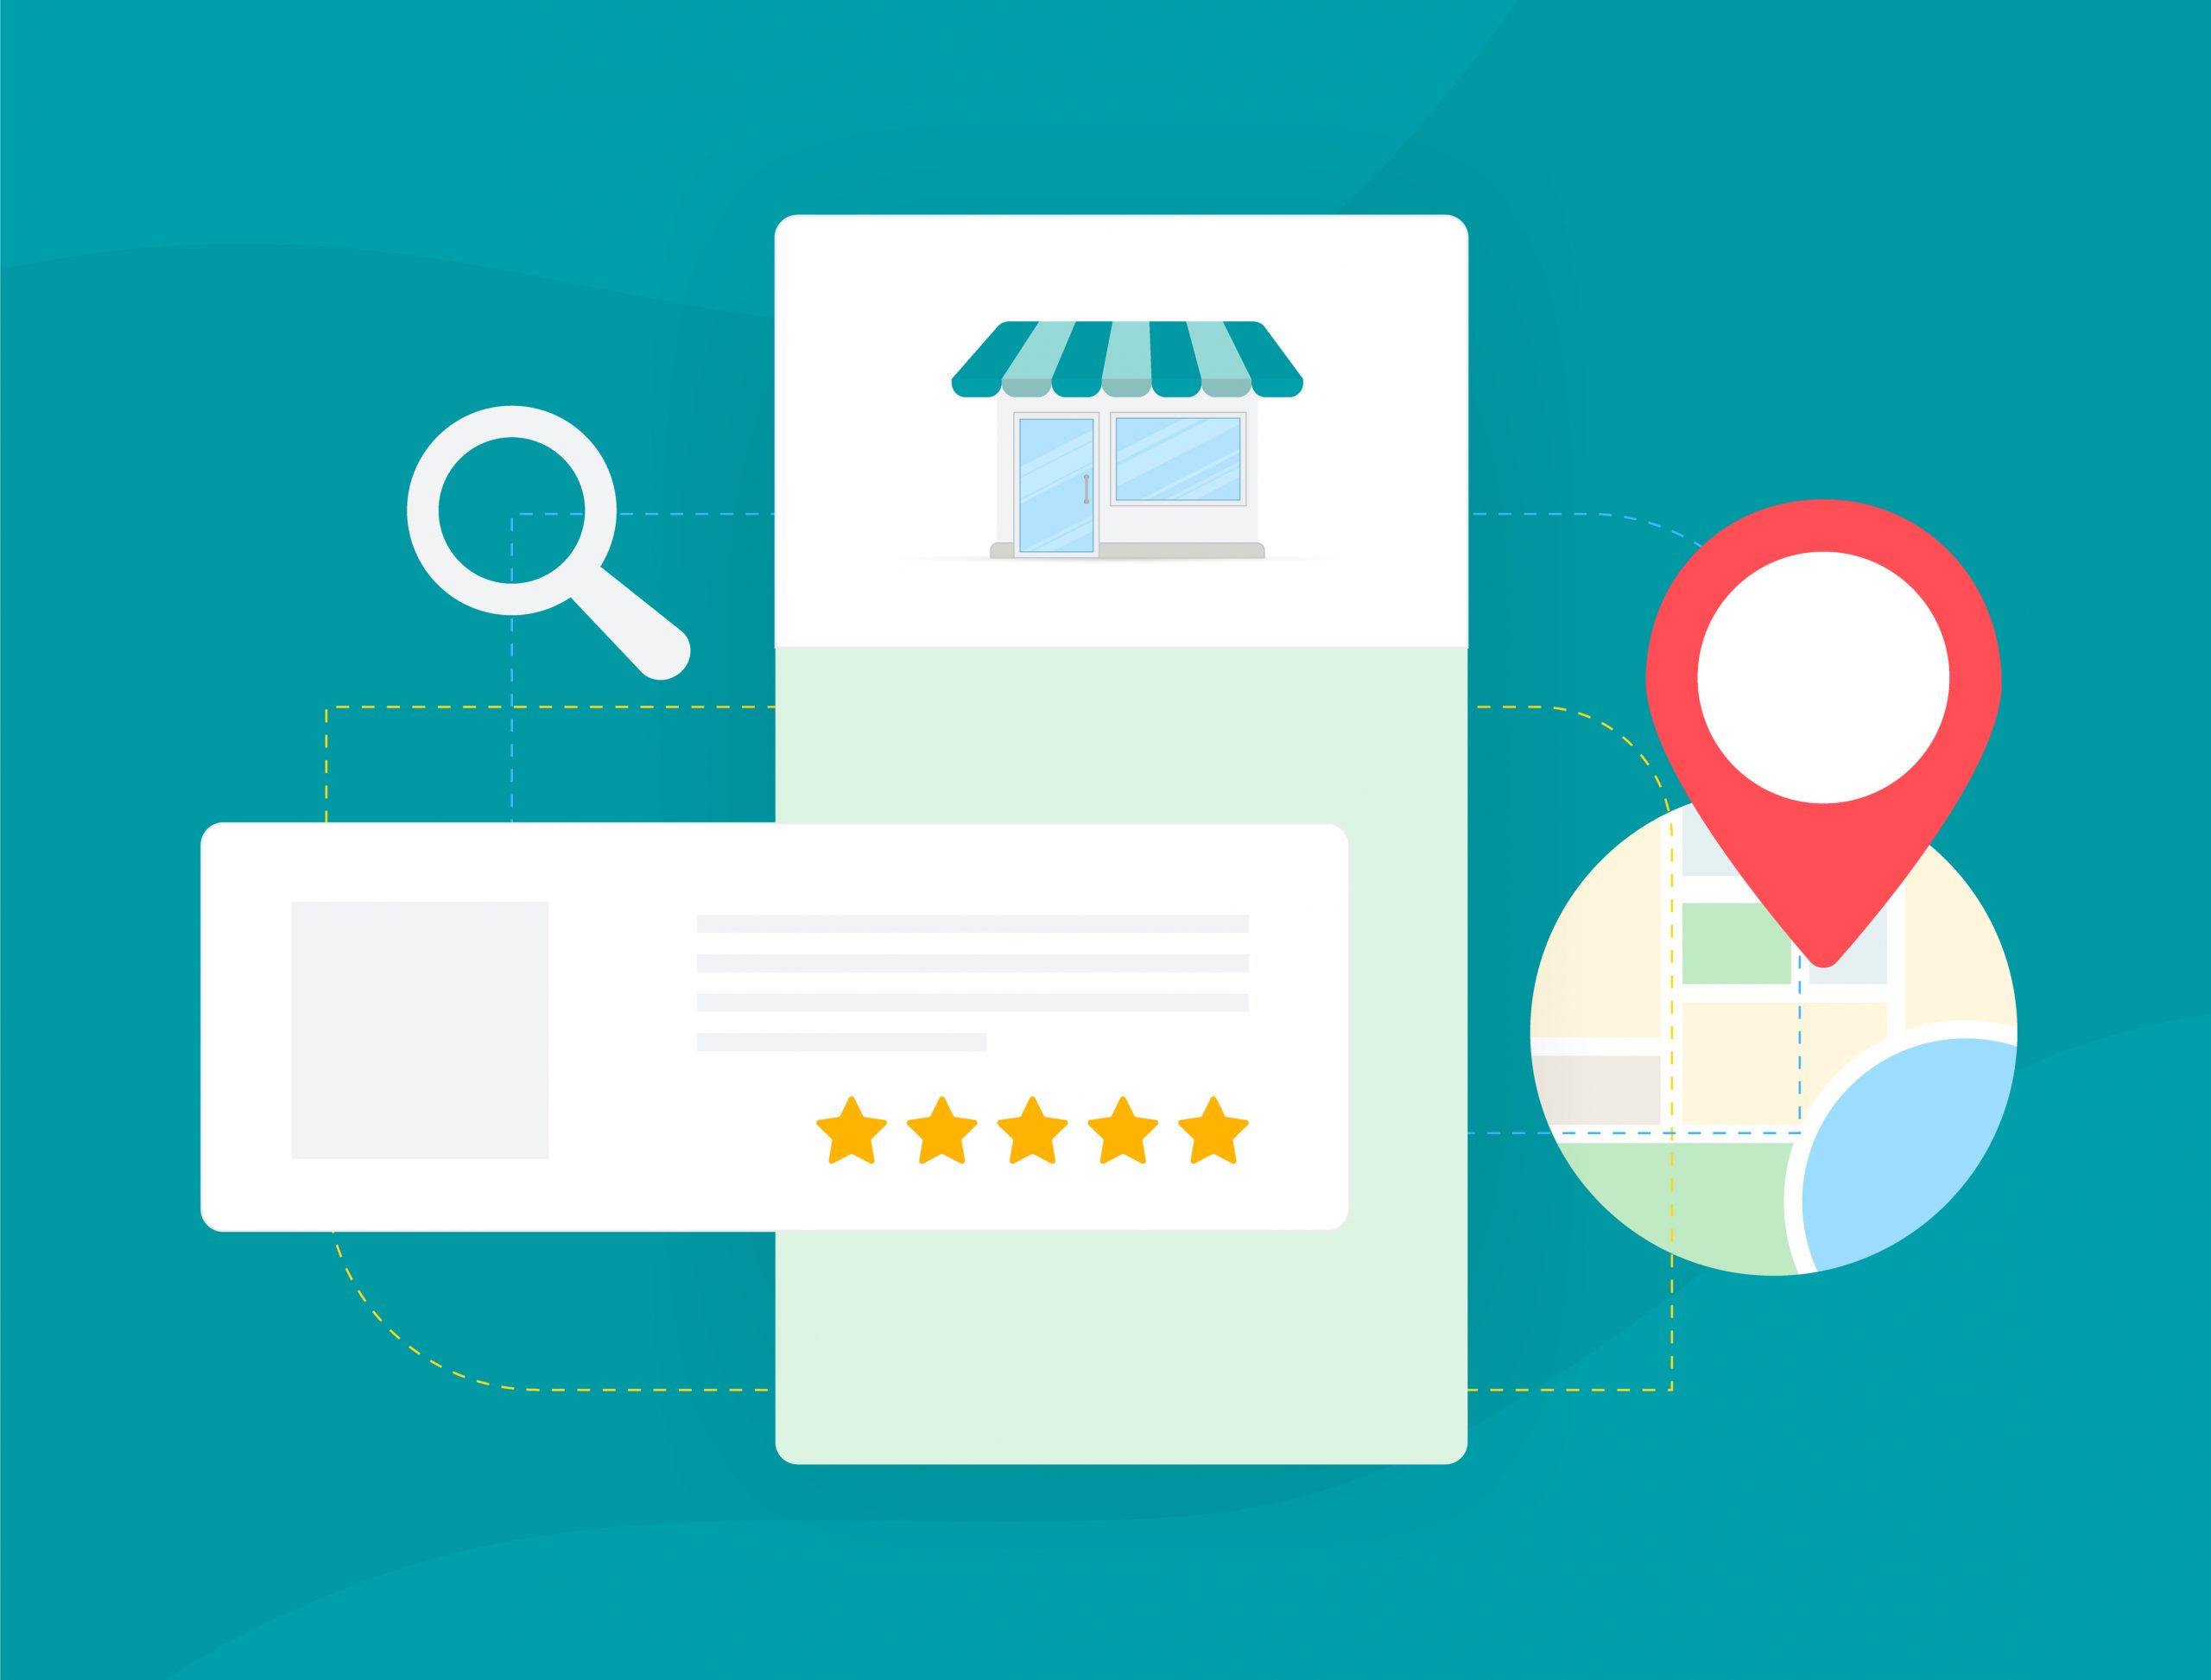 Why are Google Reviews so important?